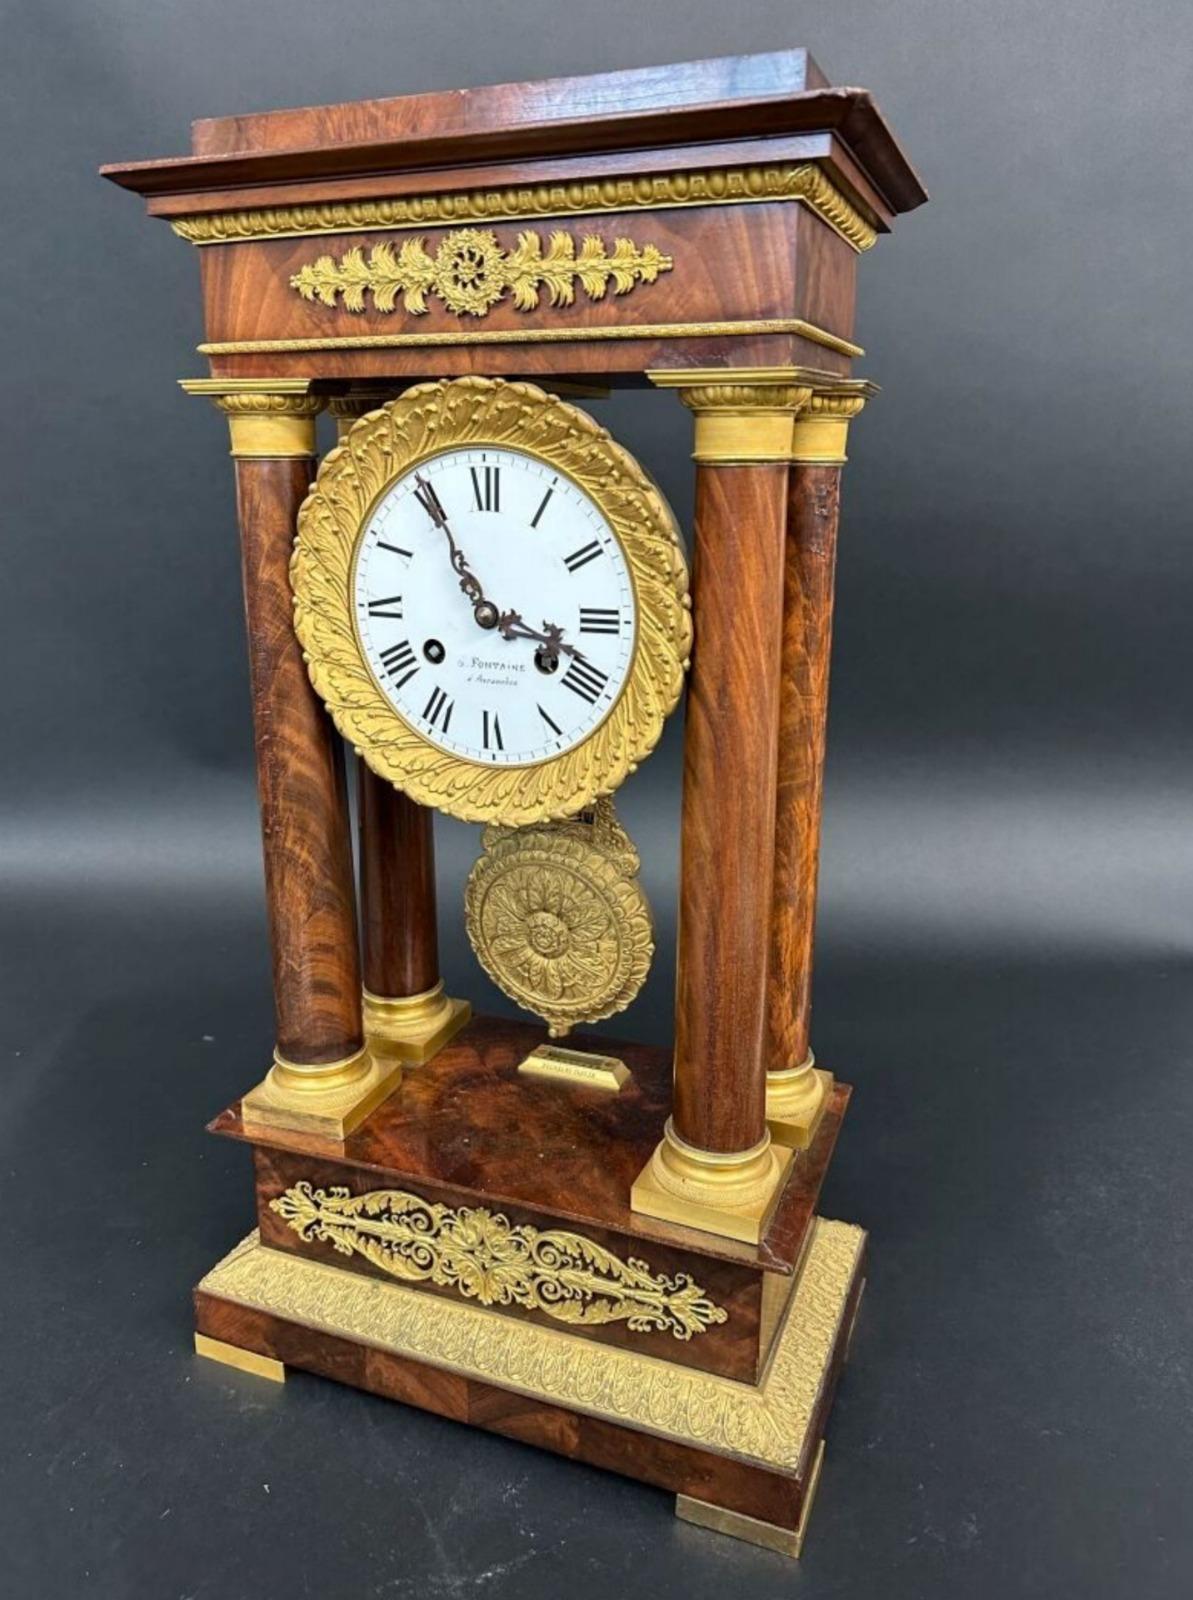 Amazing Napoleon III Empire Clock 19th Century
mahogany and mahogany veneer porch with gilt and chiseled bronze ornamentation.
White enamel dial signed FONTAINE in Avranches,
Roman numerals for hours
Pendulum with rosette decoration.
Mid-19th